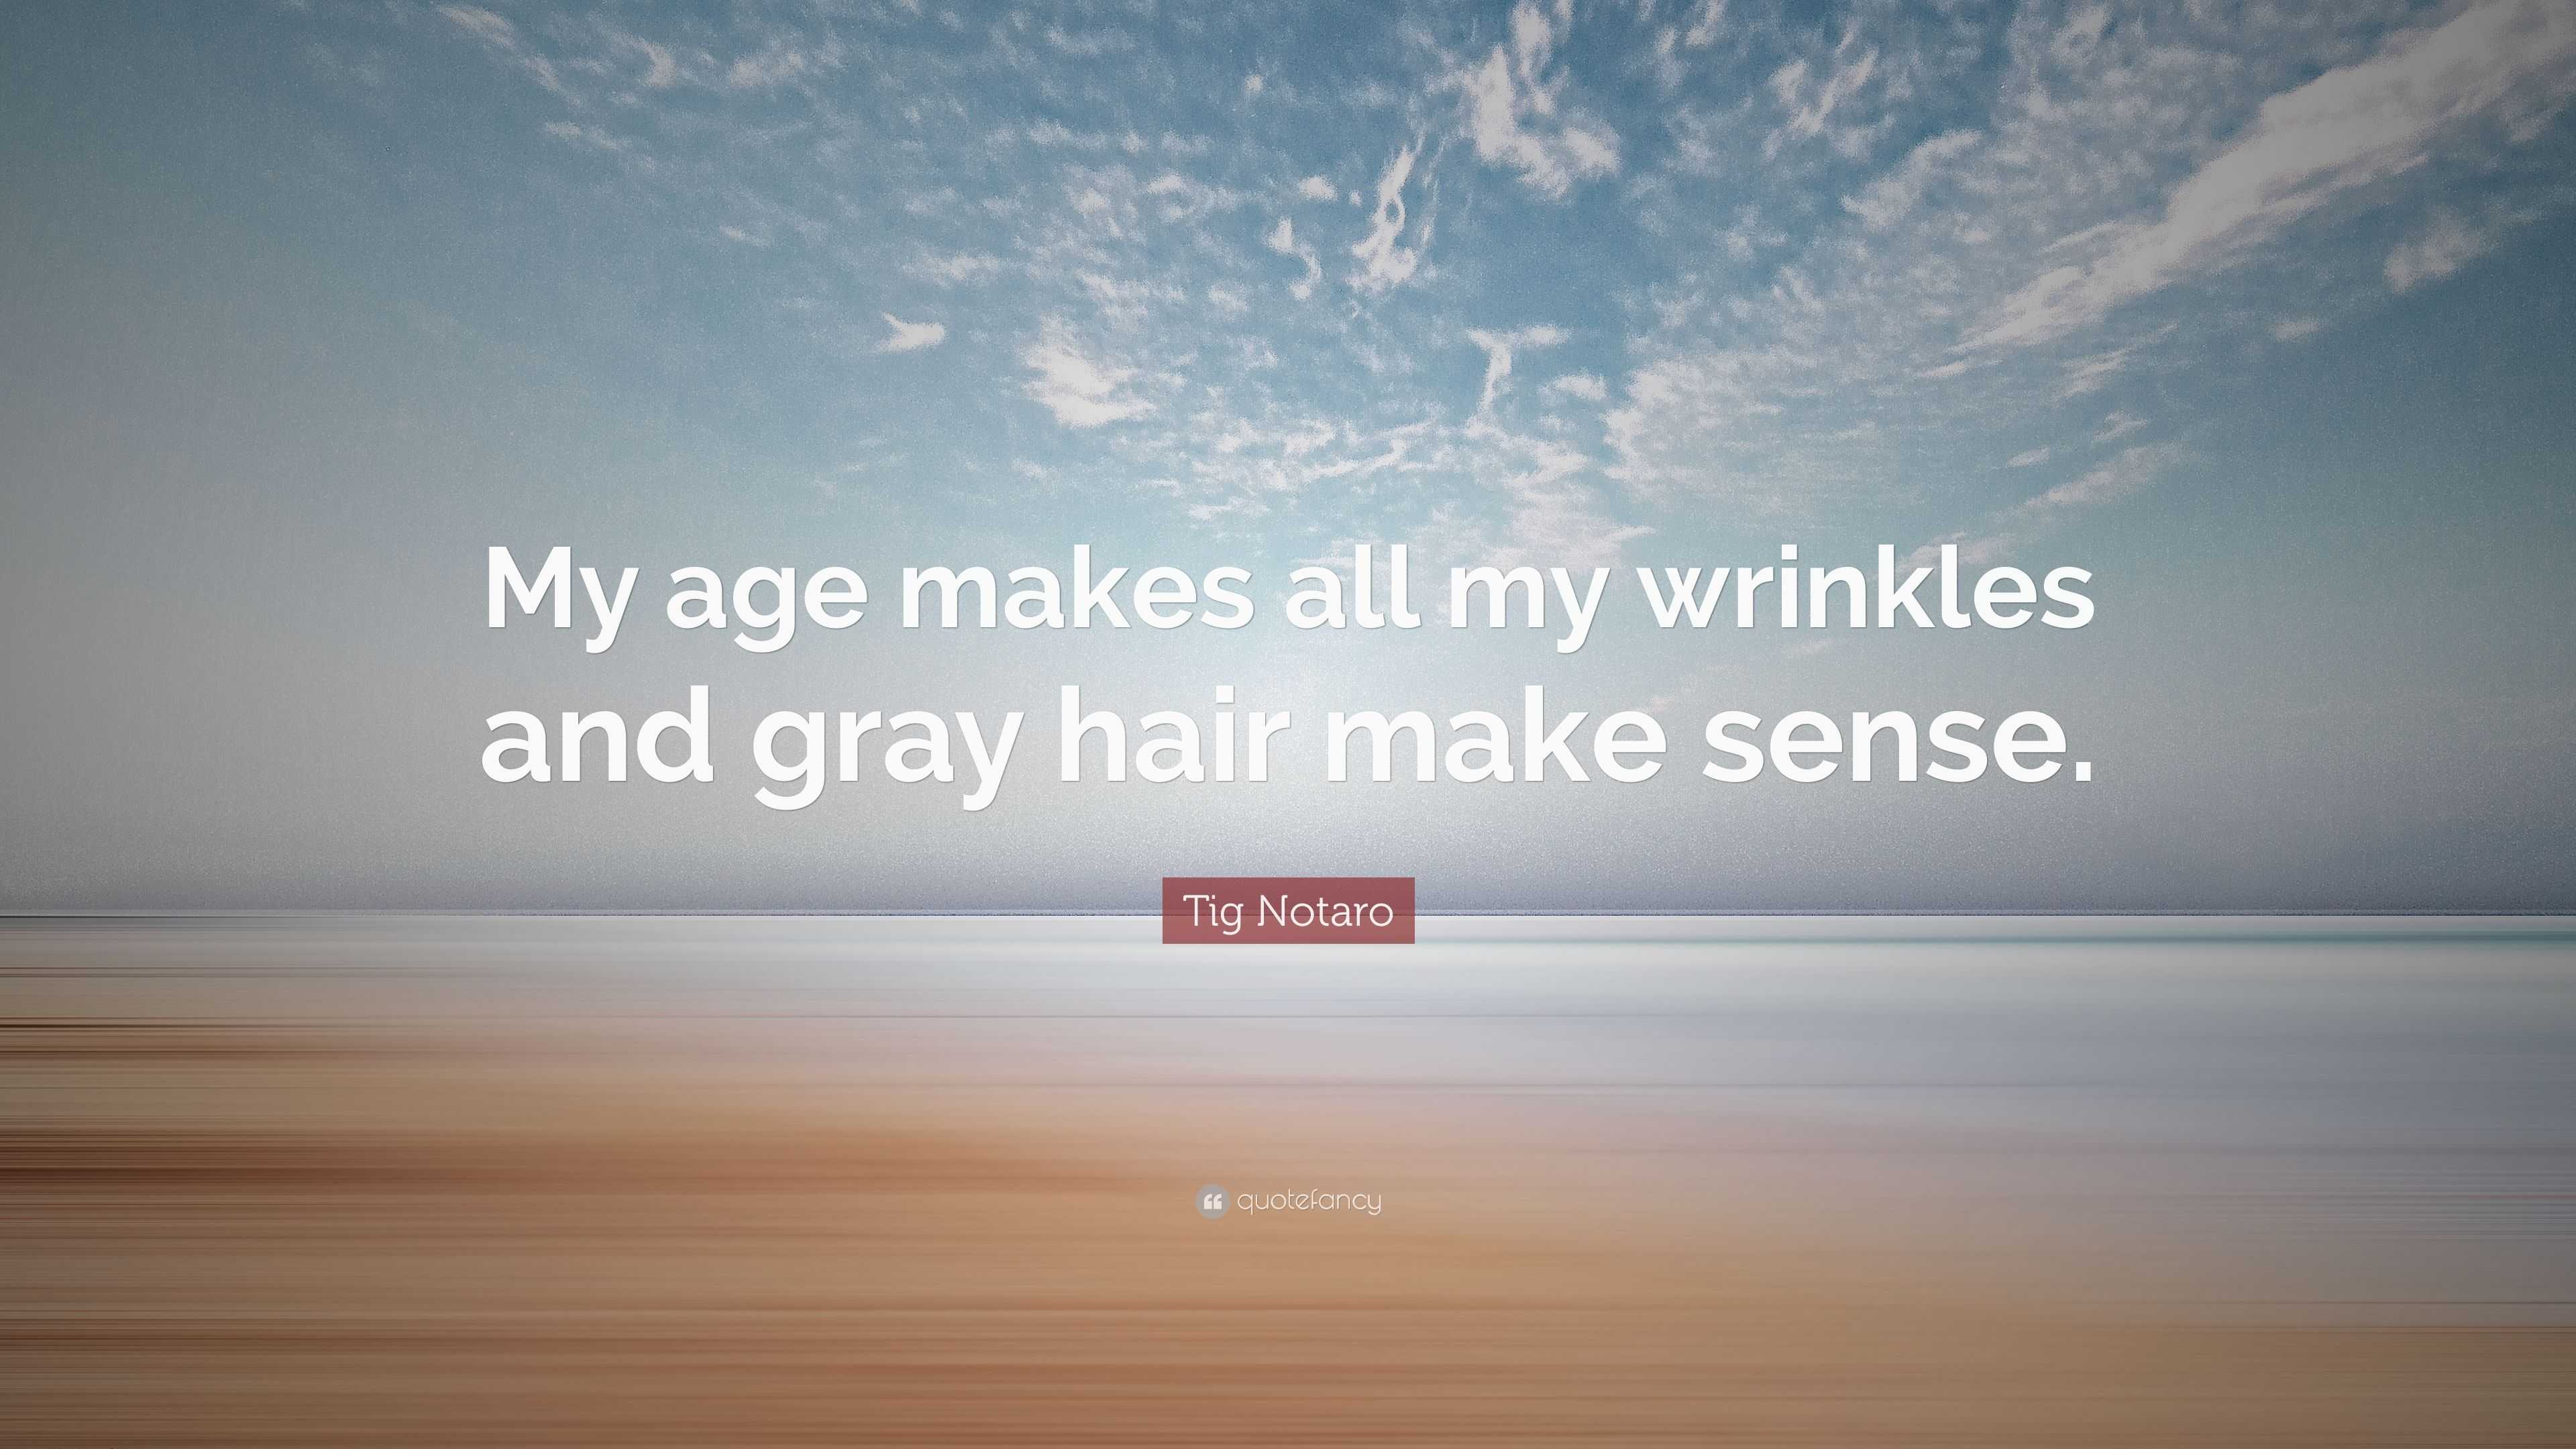 Tig Notaro Quote: “My age makes all my wrinkles and gray hair make sense.”